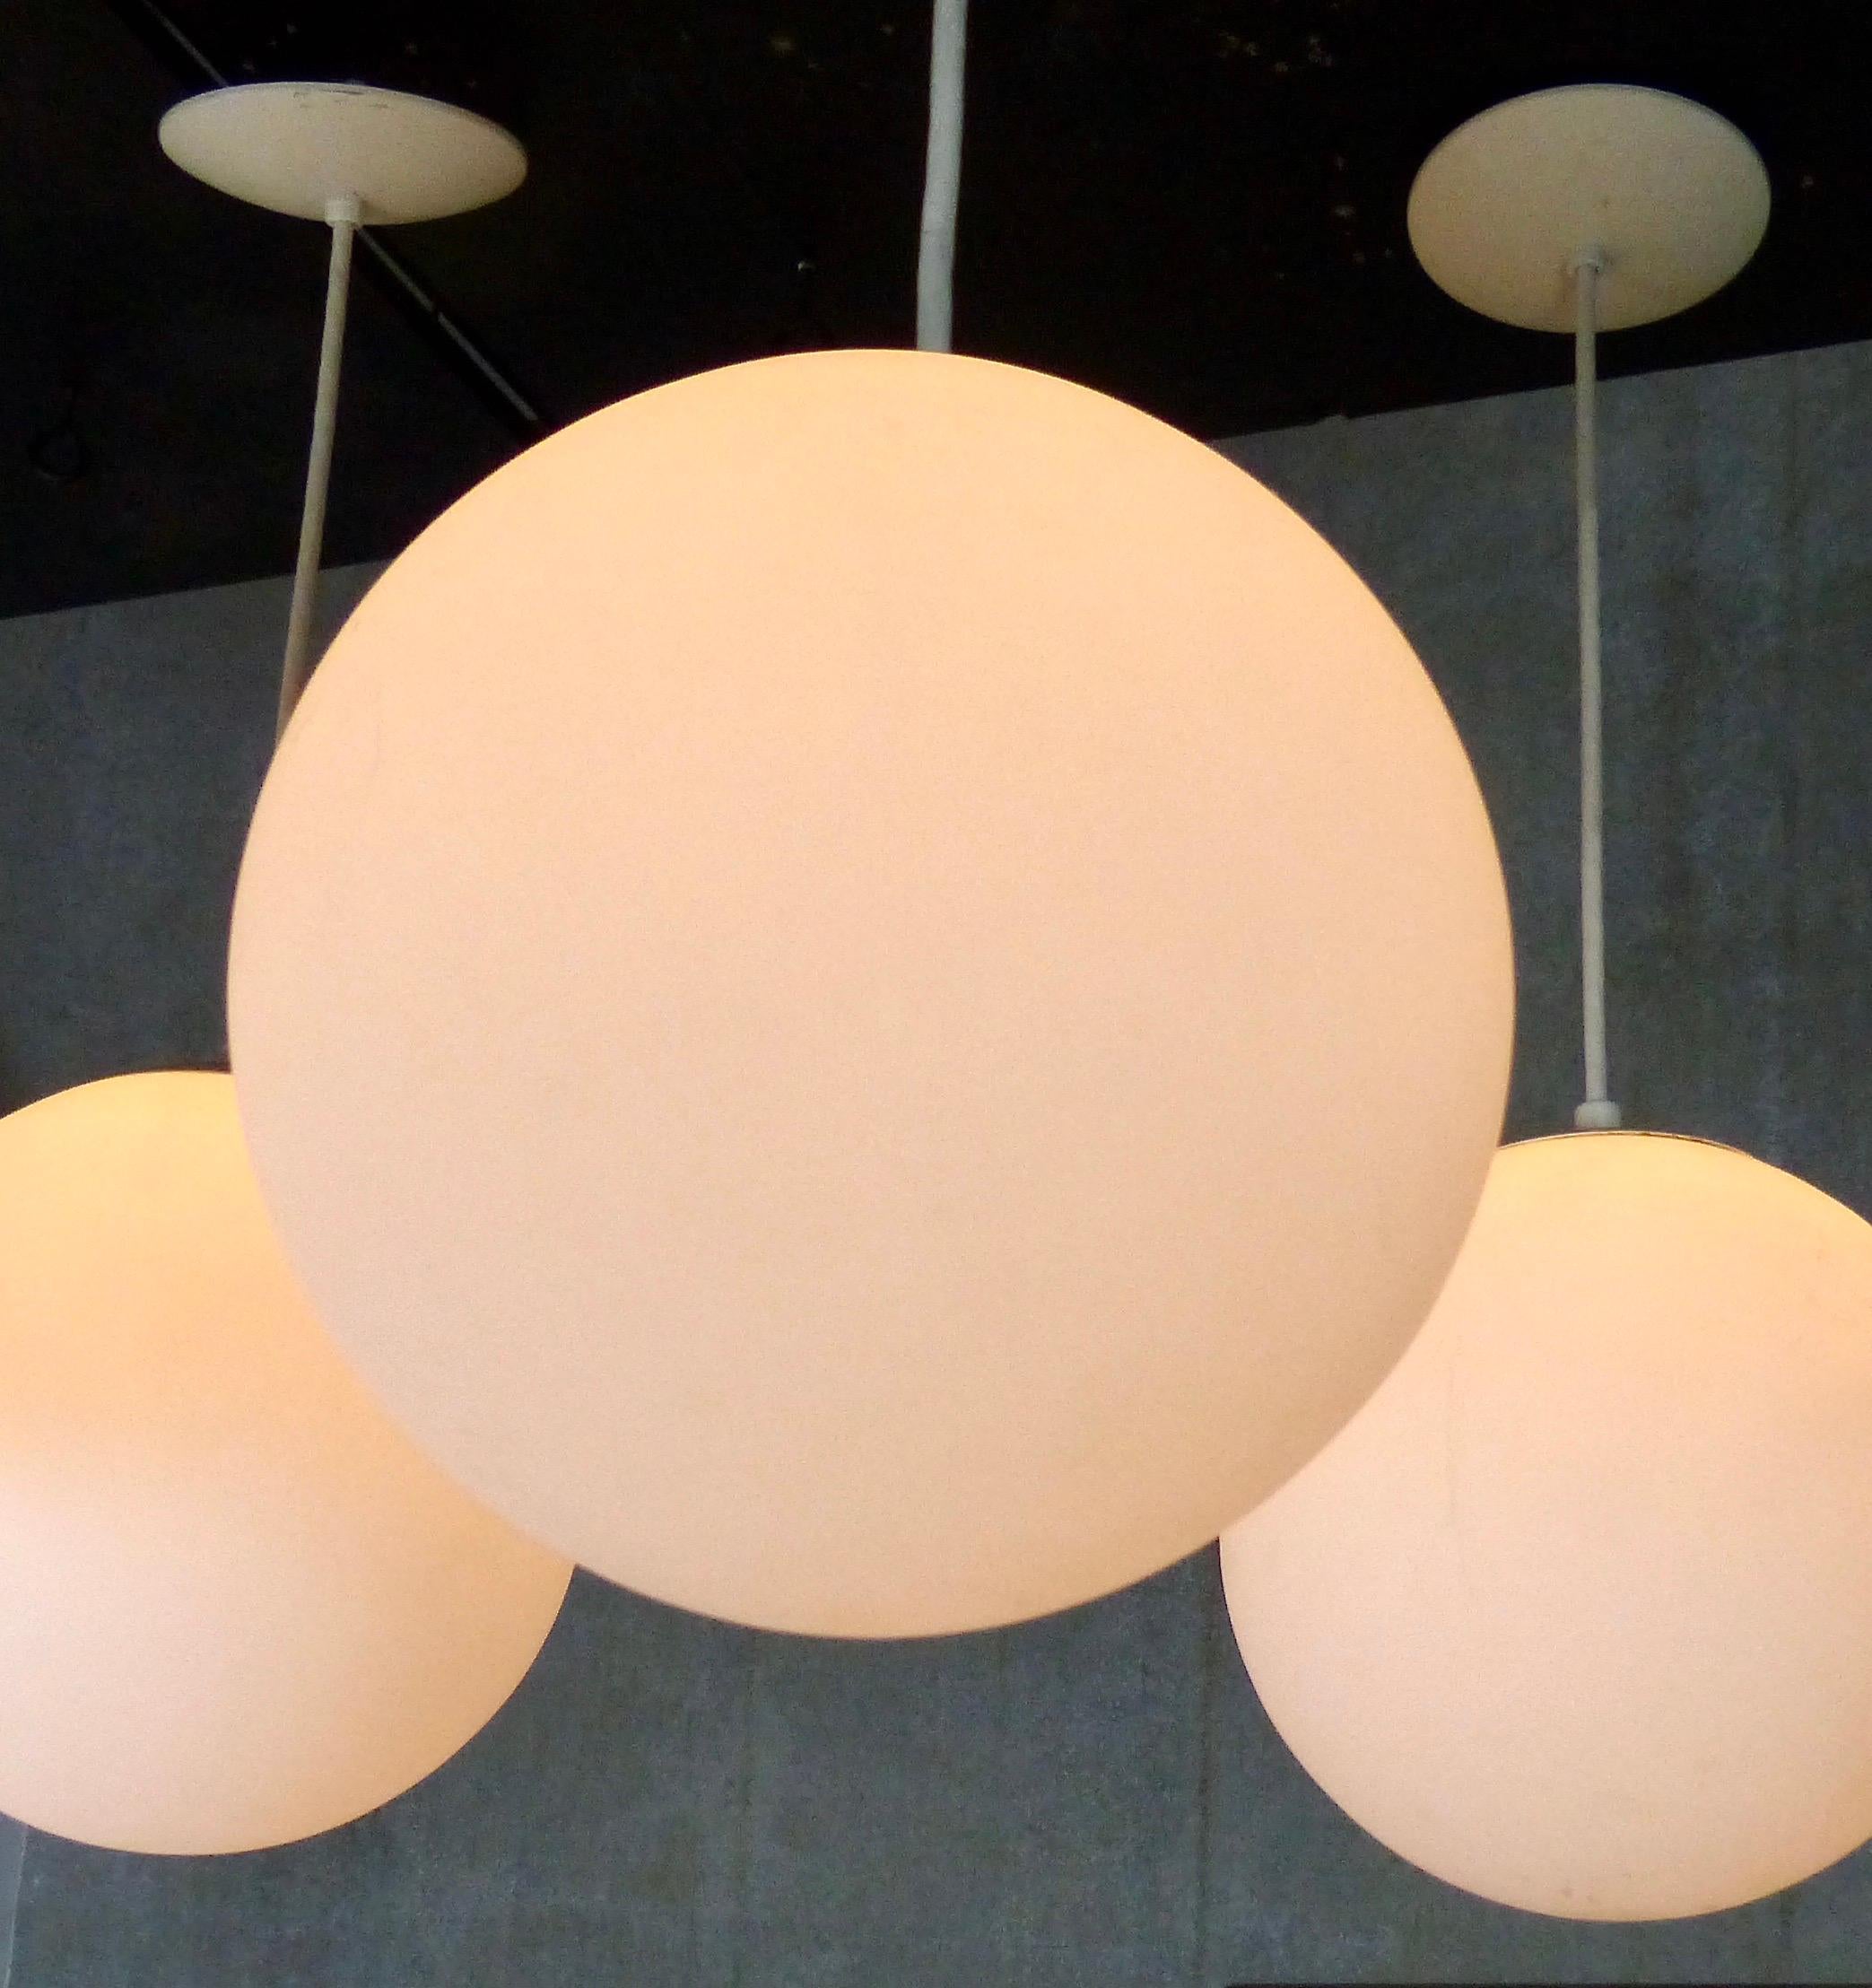 Classic modern milk glass globe pendant lights. Currently hanging at 30” high but could be adjusted to meet your design requirements. Re-wired and inspected/approved to current electrical standards; ceiling mounting plate included. Currently eight